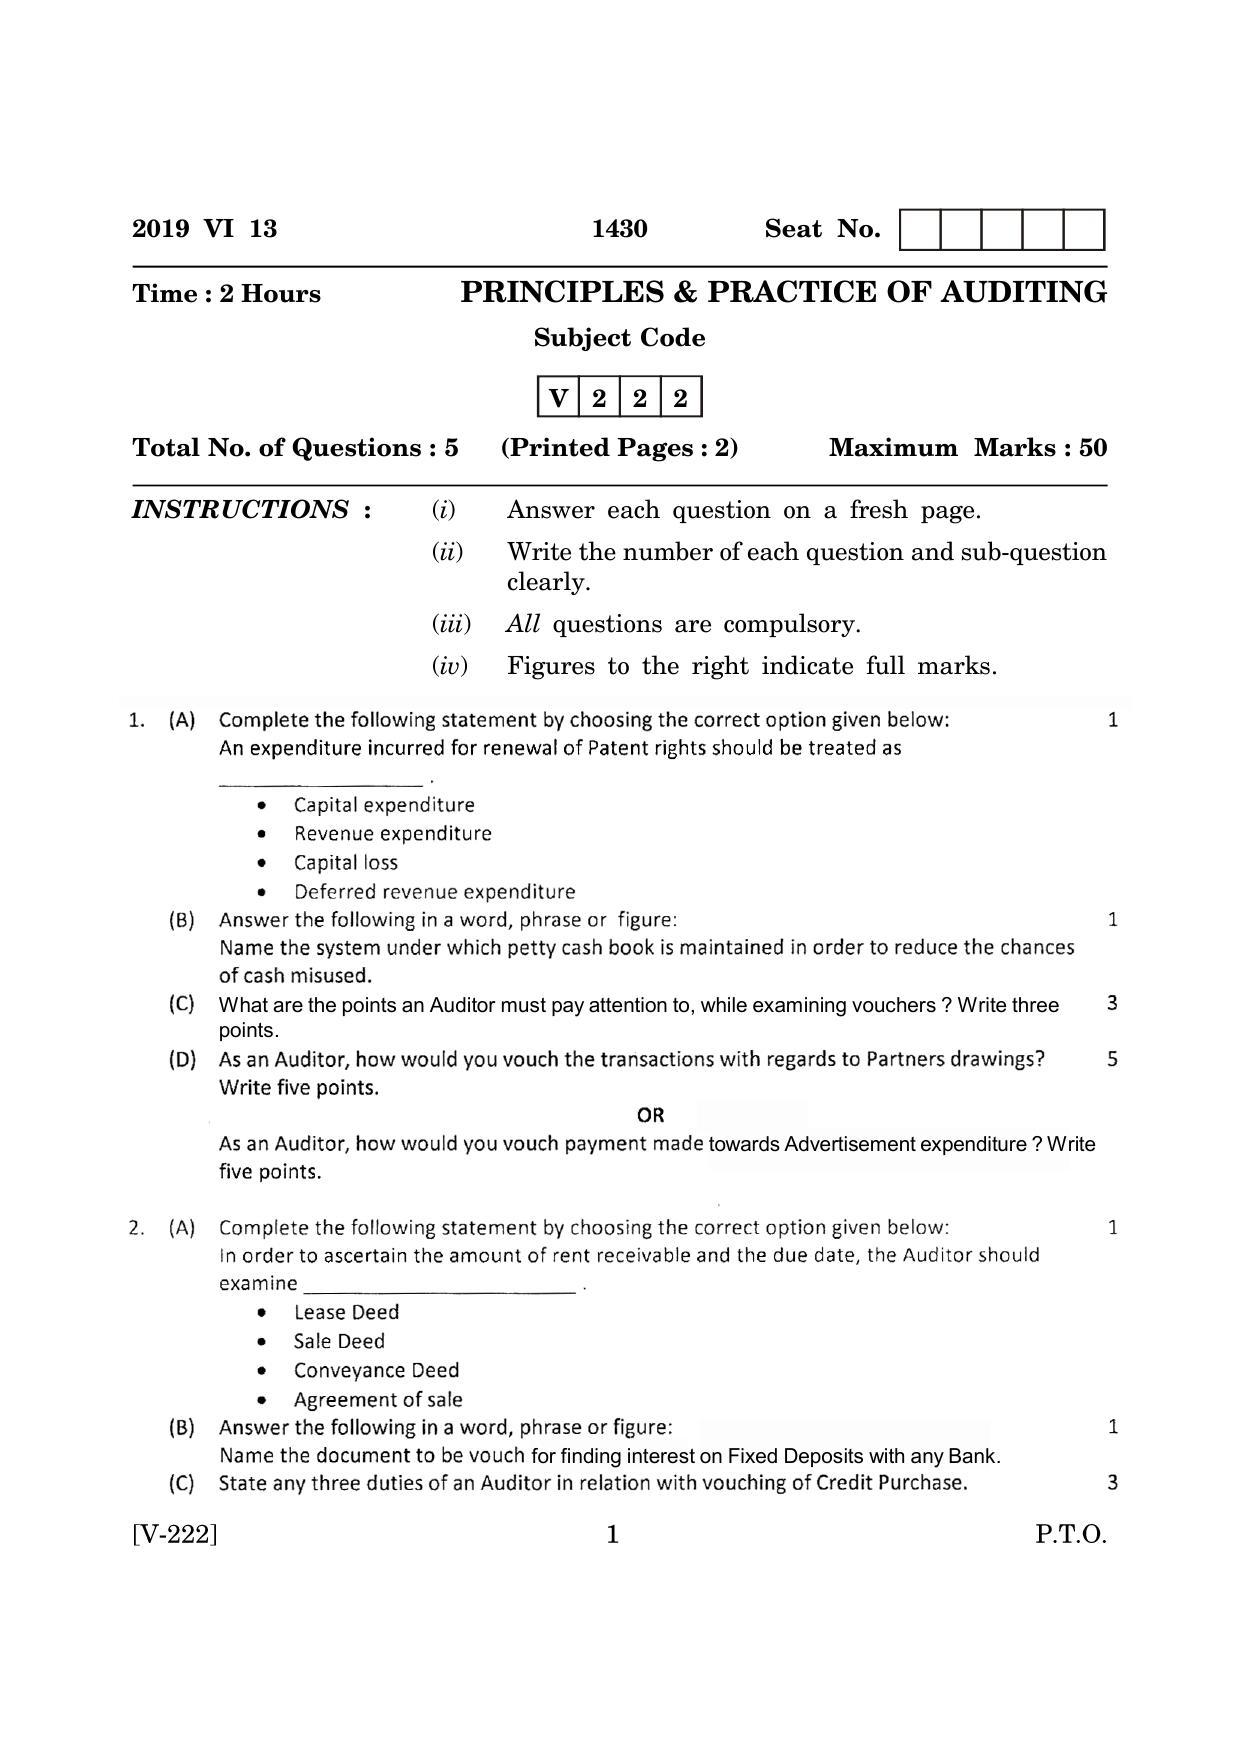 Goa Board Class 12 Principles & Practice of Auditing  2019 (June 2019) Question Paper - Page 1